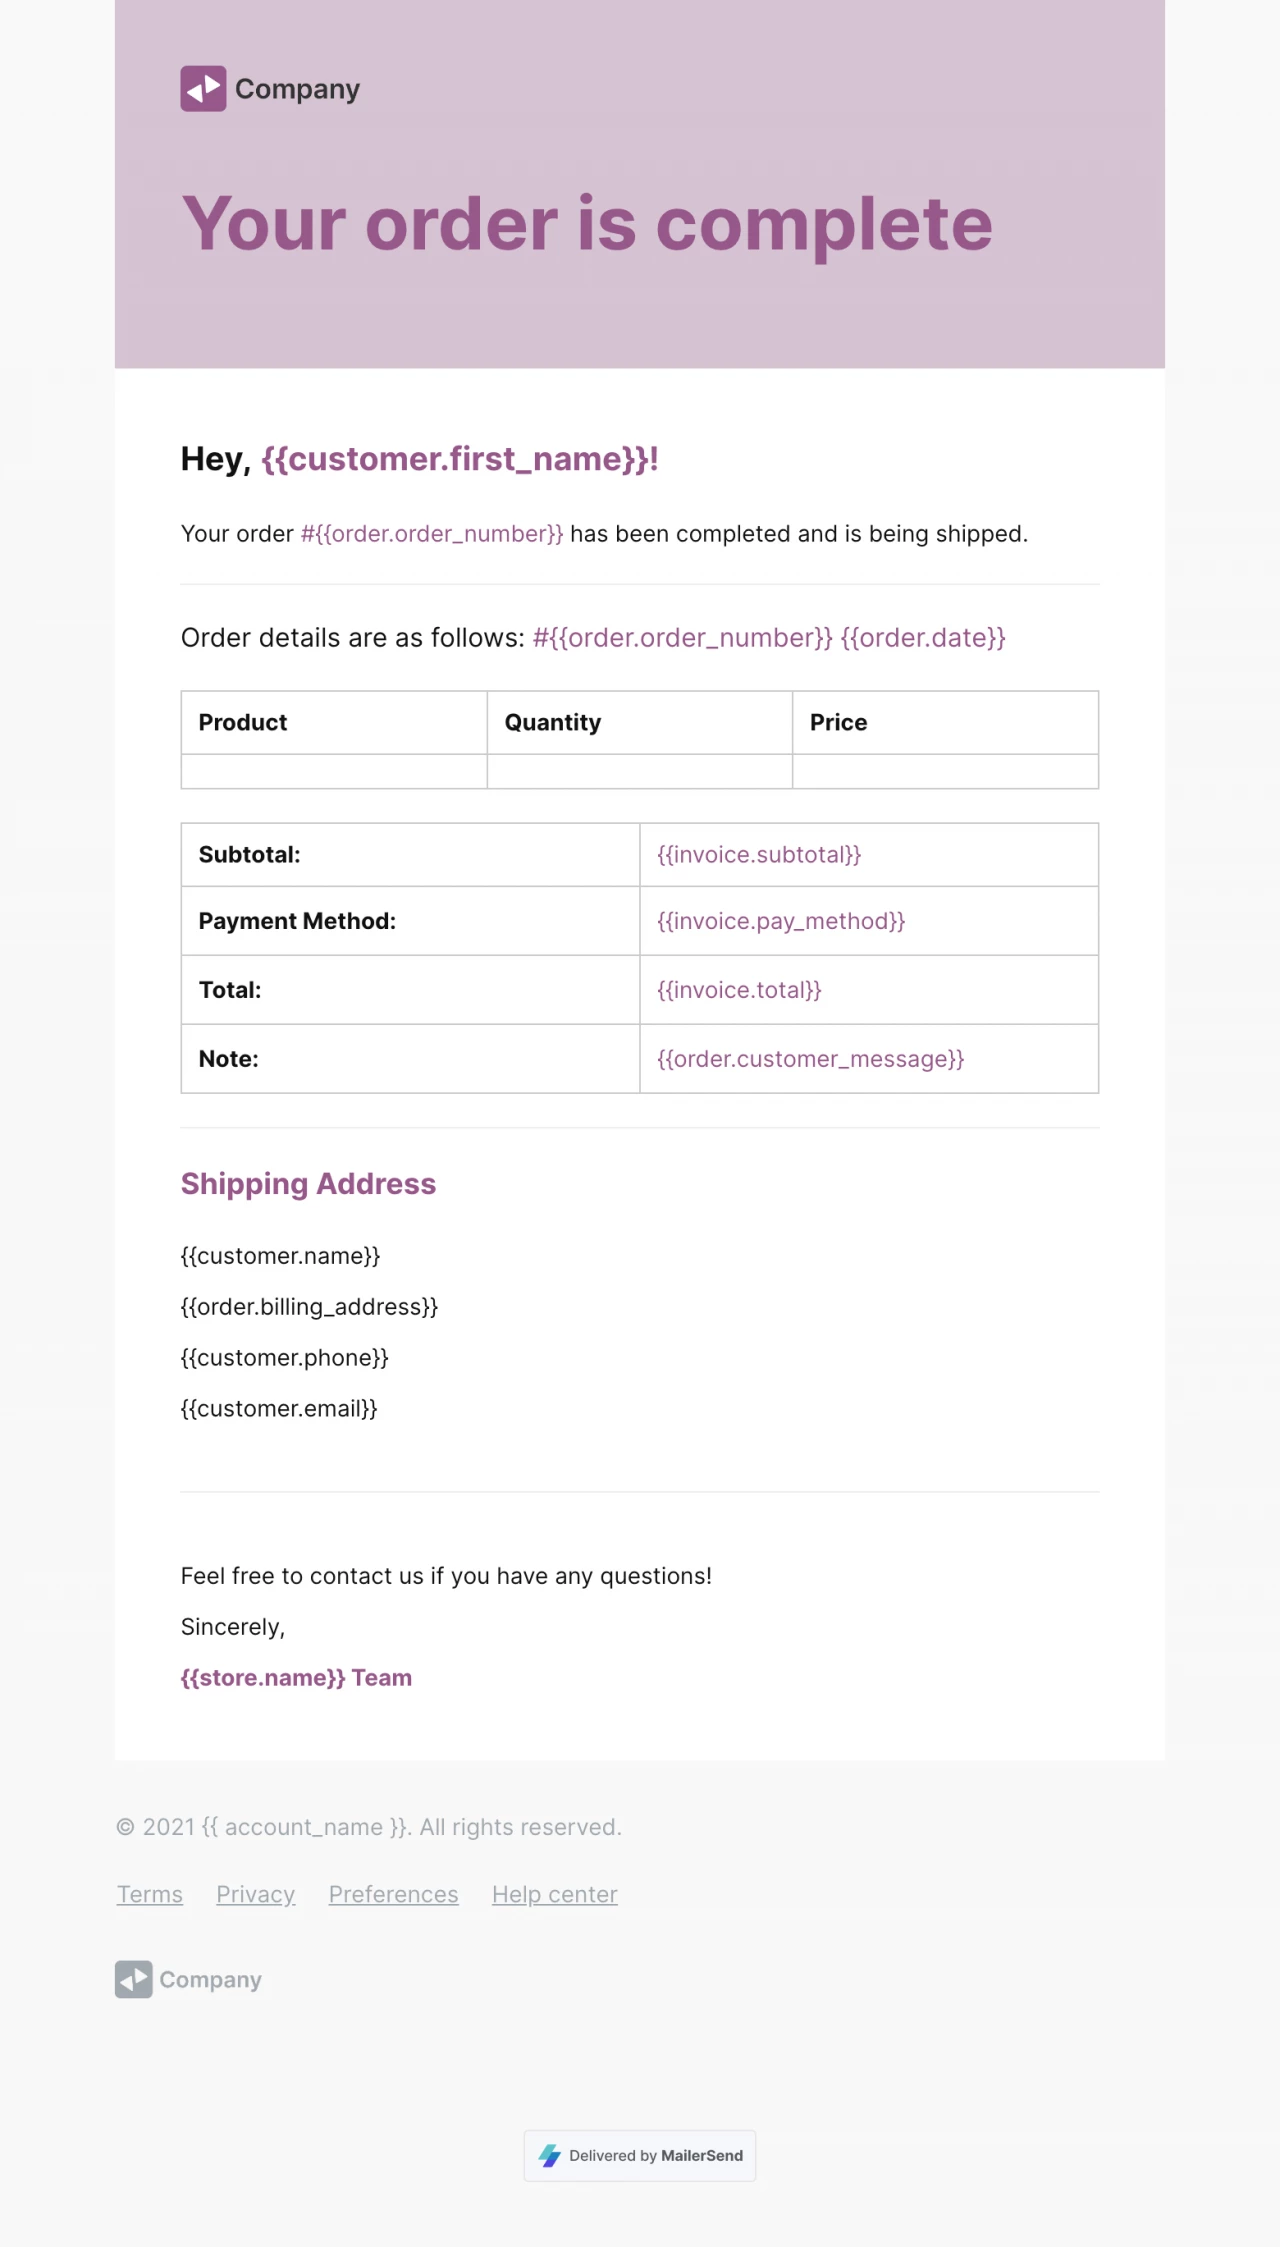 WooCommerce Order completed